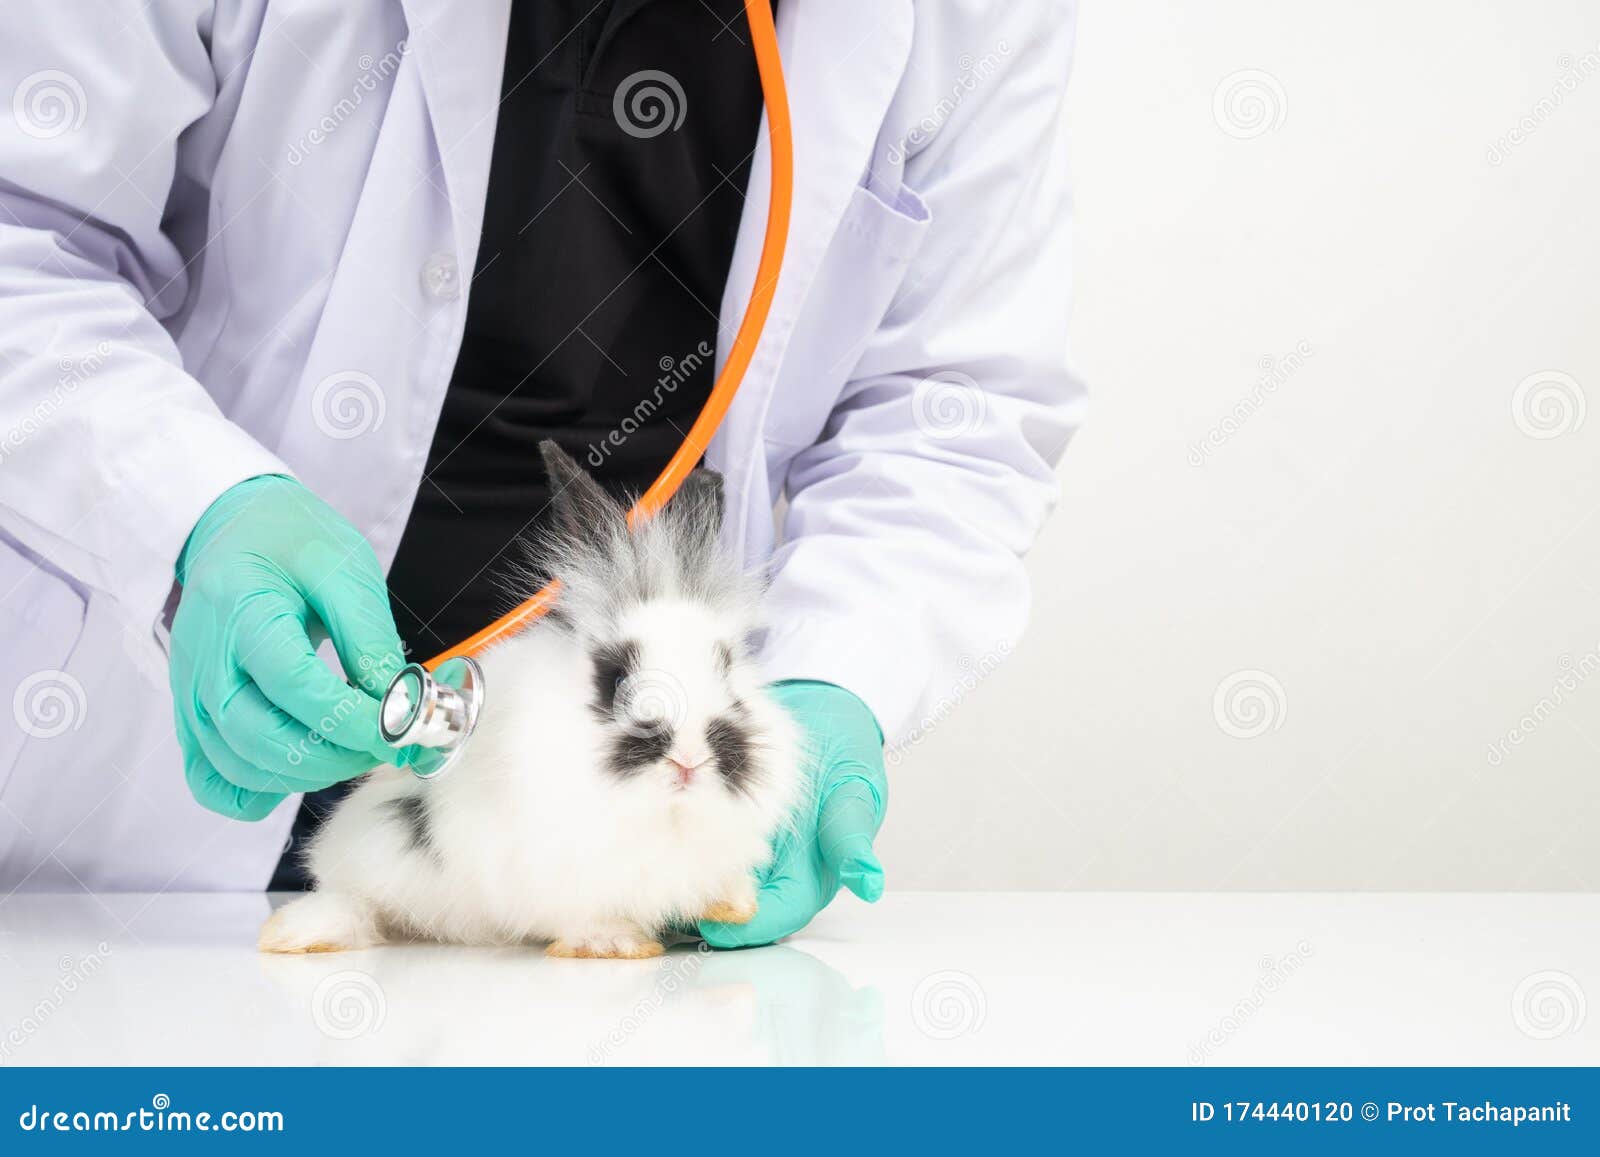 Veterinarians Use Stethoscope To Check the Fluffy Rabbit Heart and Lung in  Clinics. Concept of Animal Healthcare with a Stock Photo - Image of  examination, doctor: 174440120